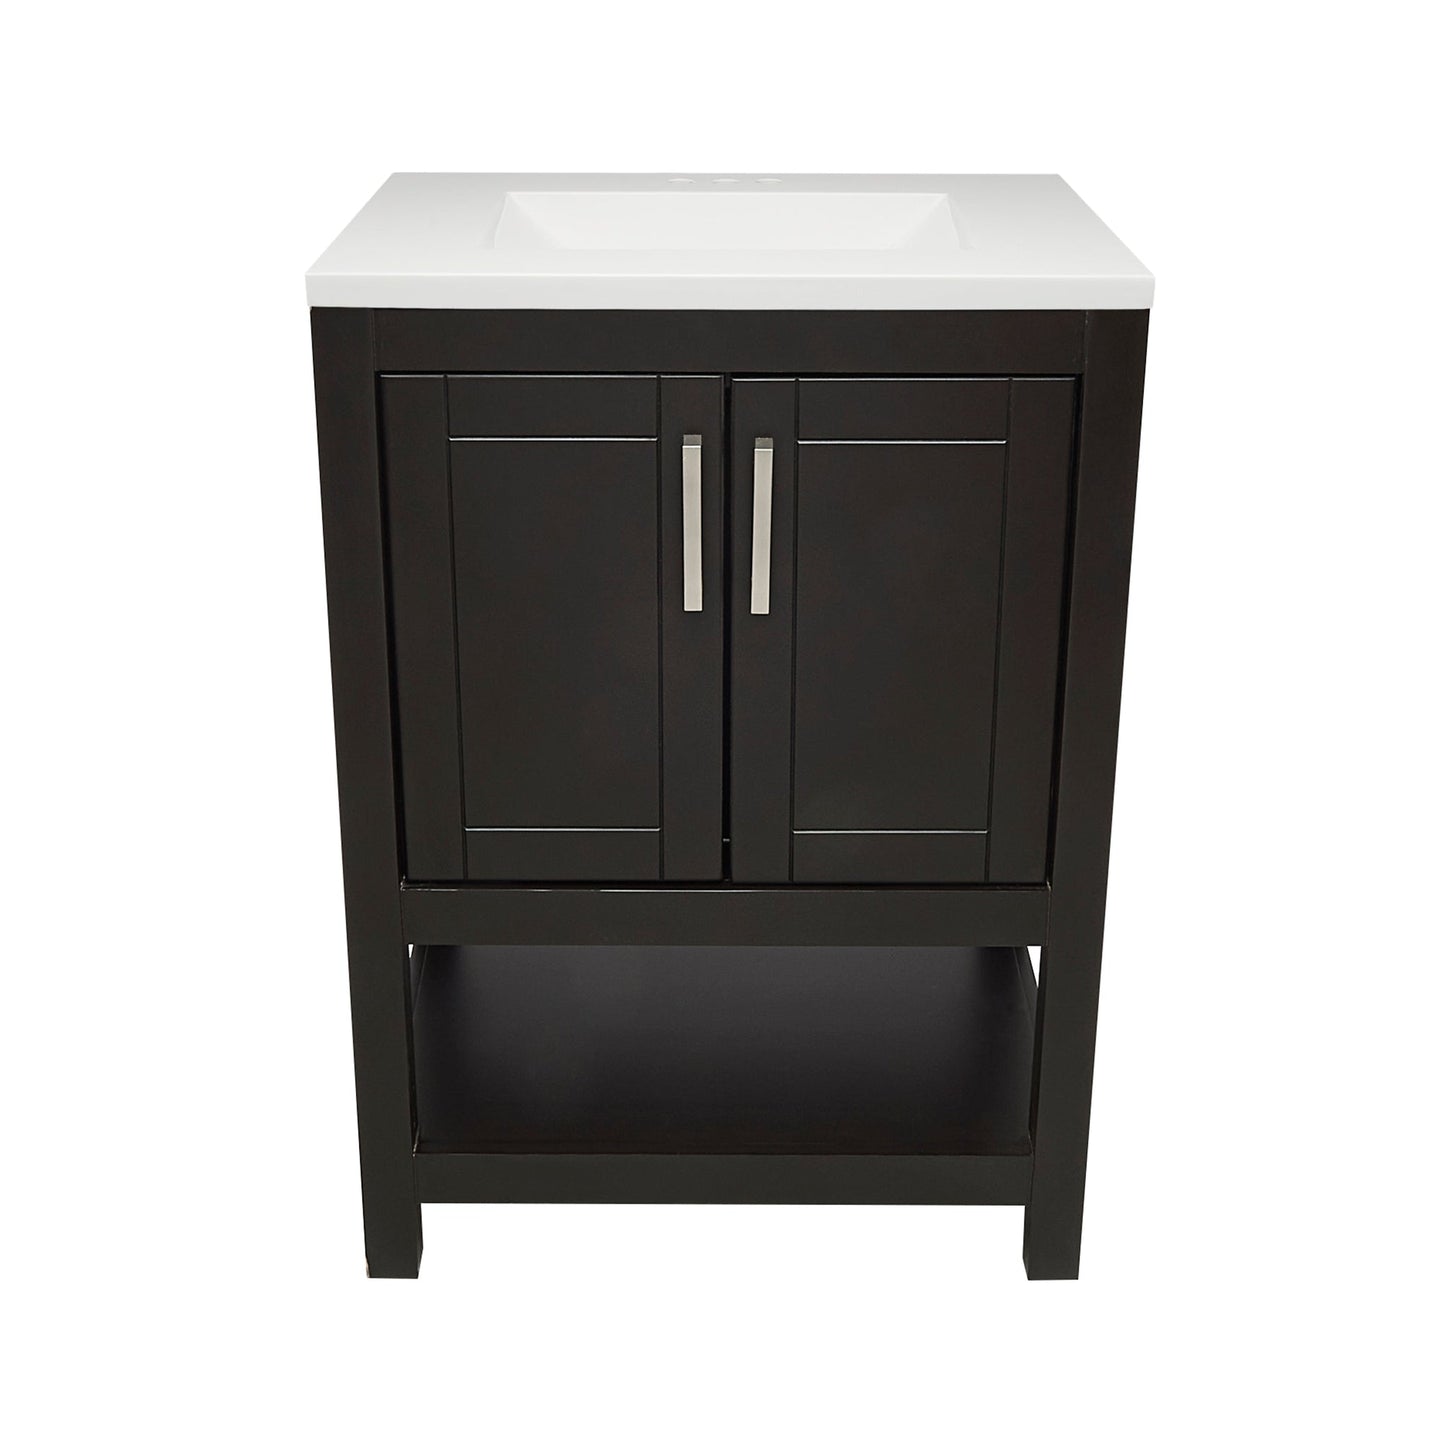 Ella's Bubbles Taos 25" Espresso Bathroom Vanity With White Cultured Marble Top and Sink